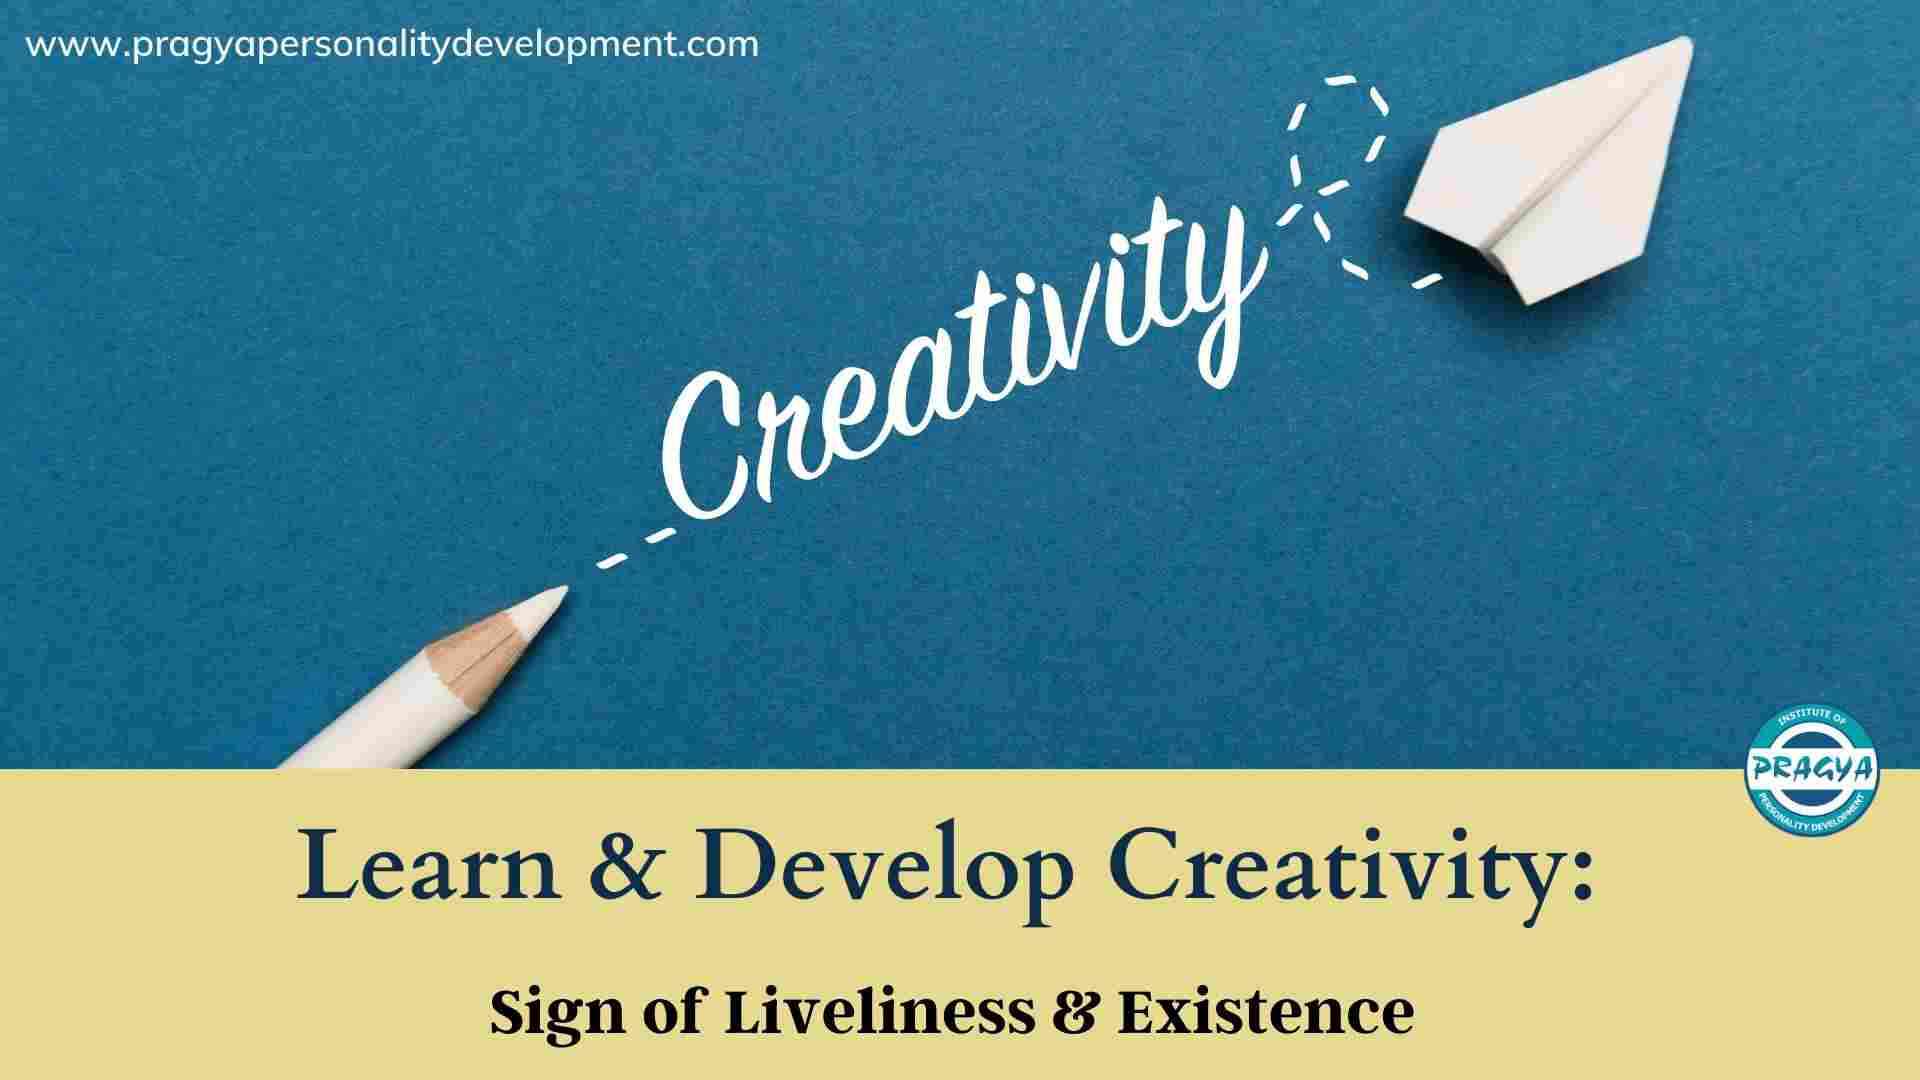 Learn & Develop Creativity: Sign of Liveliness & Existence 